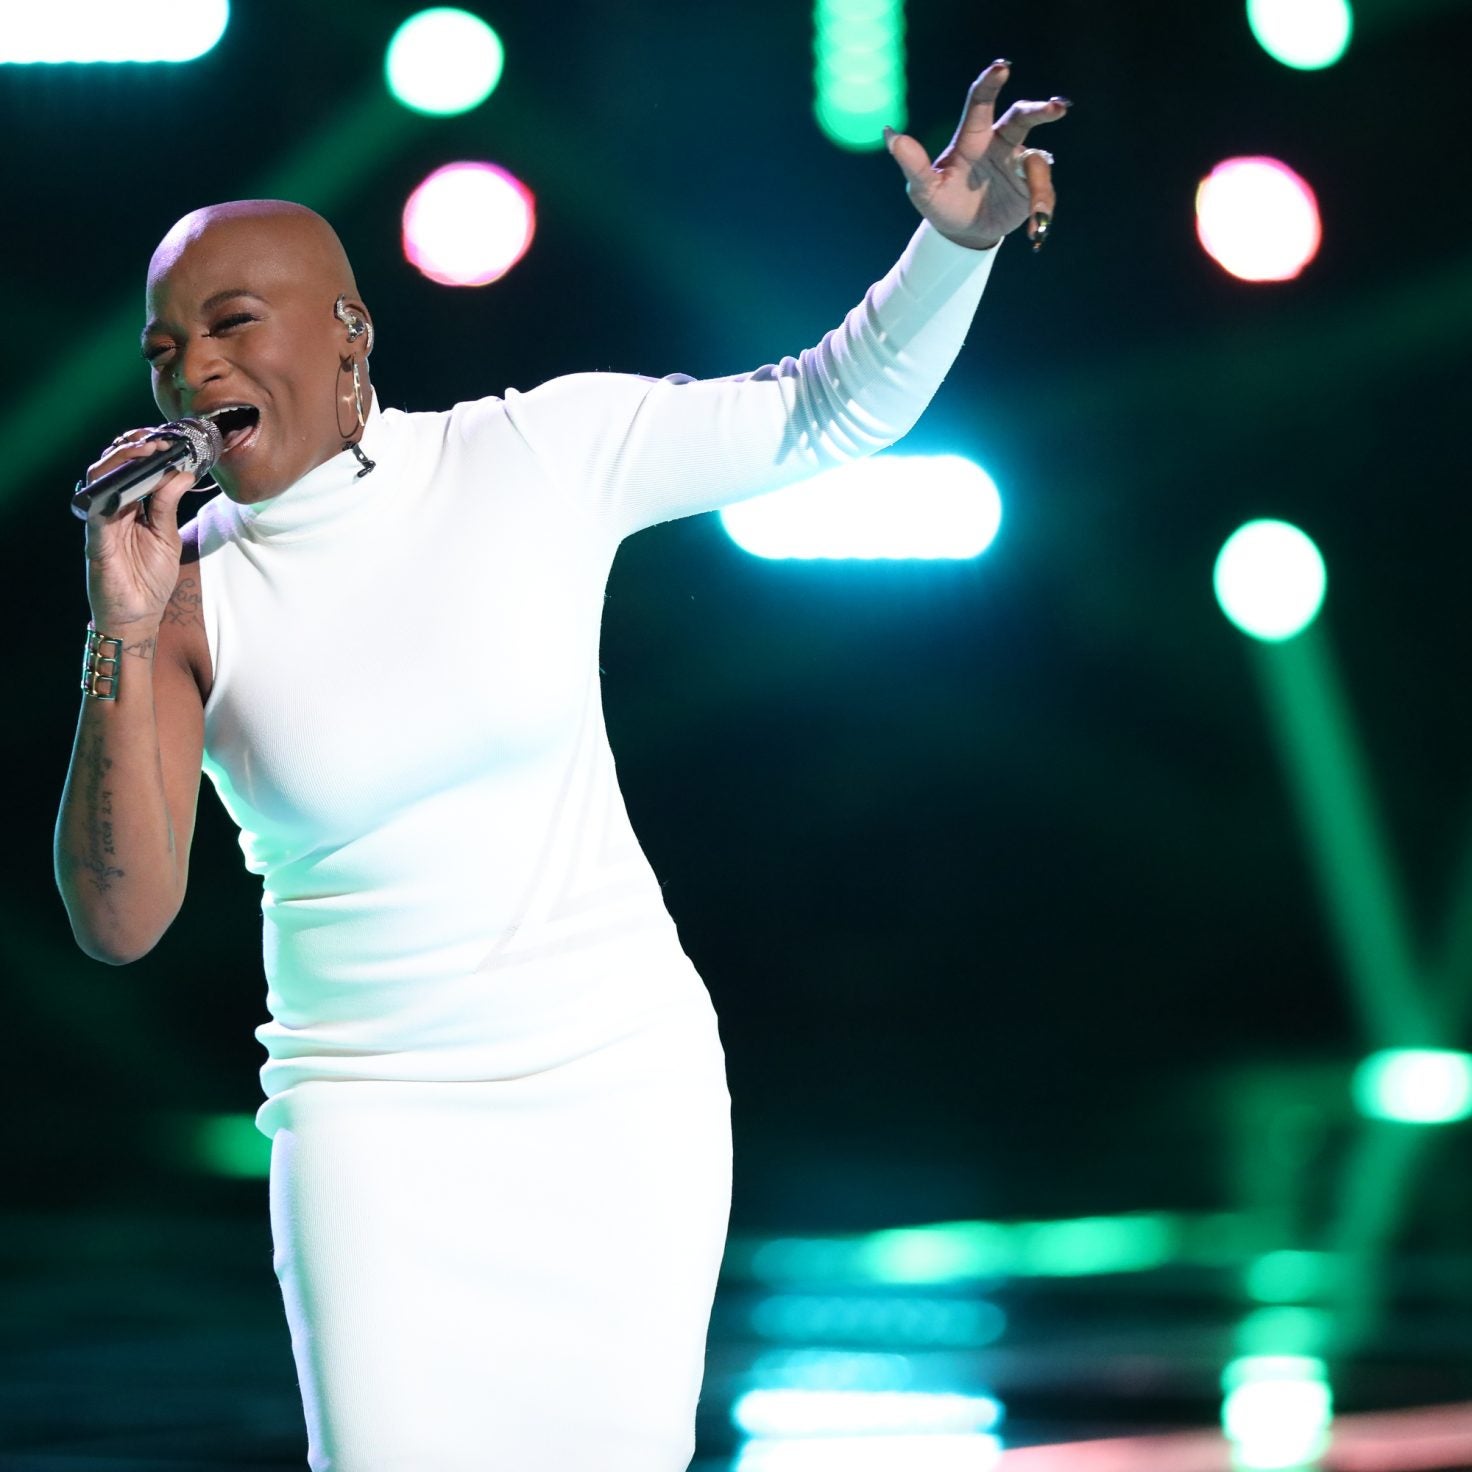 'The Voice' Singer Janice Freeman Has Passed Away At 33